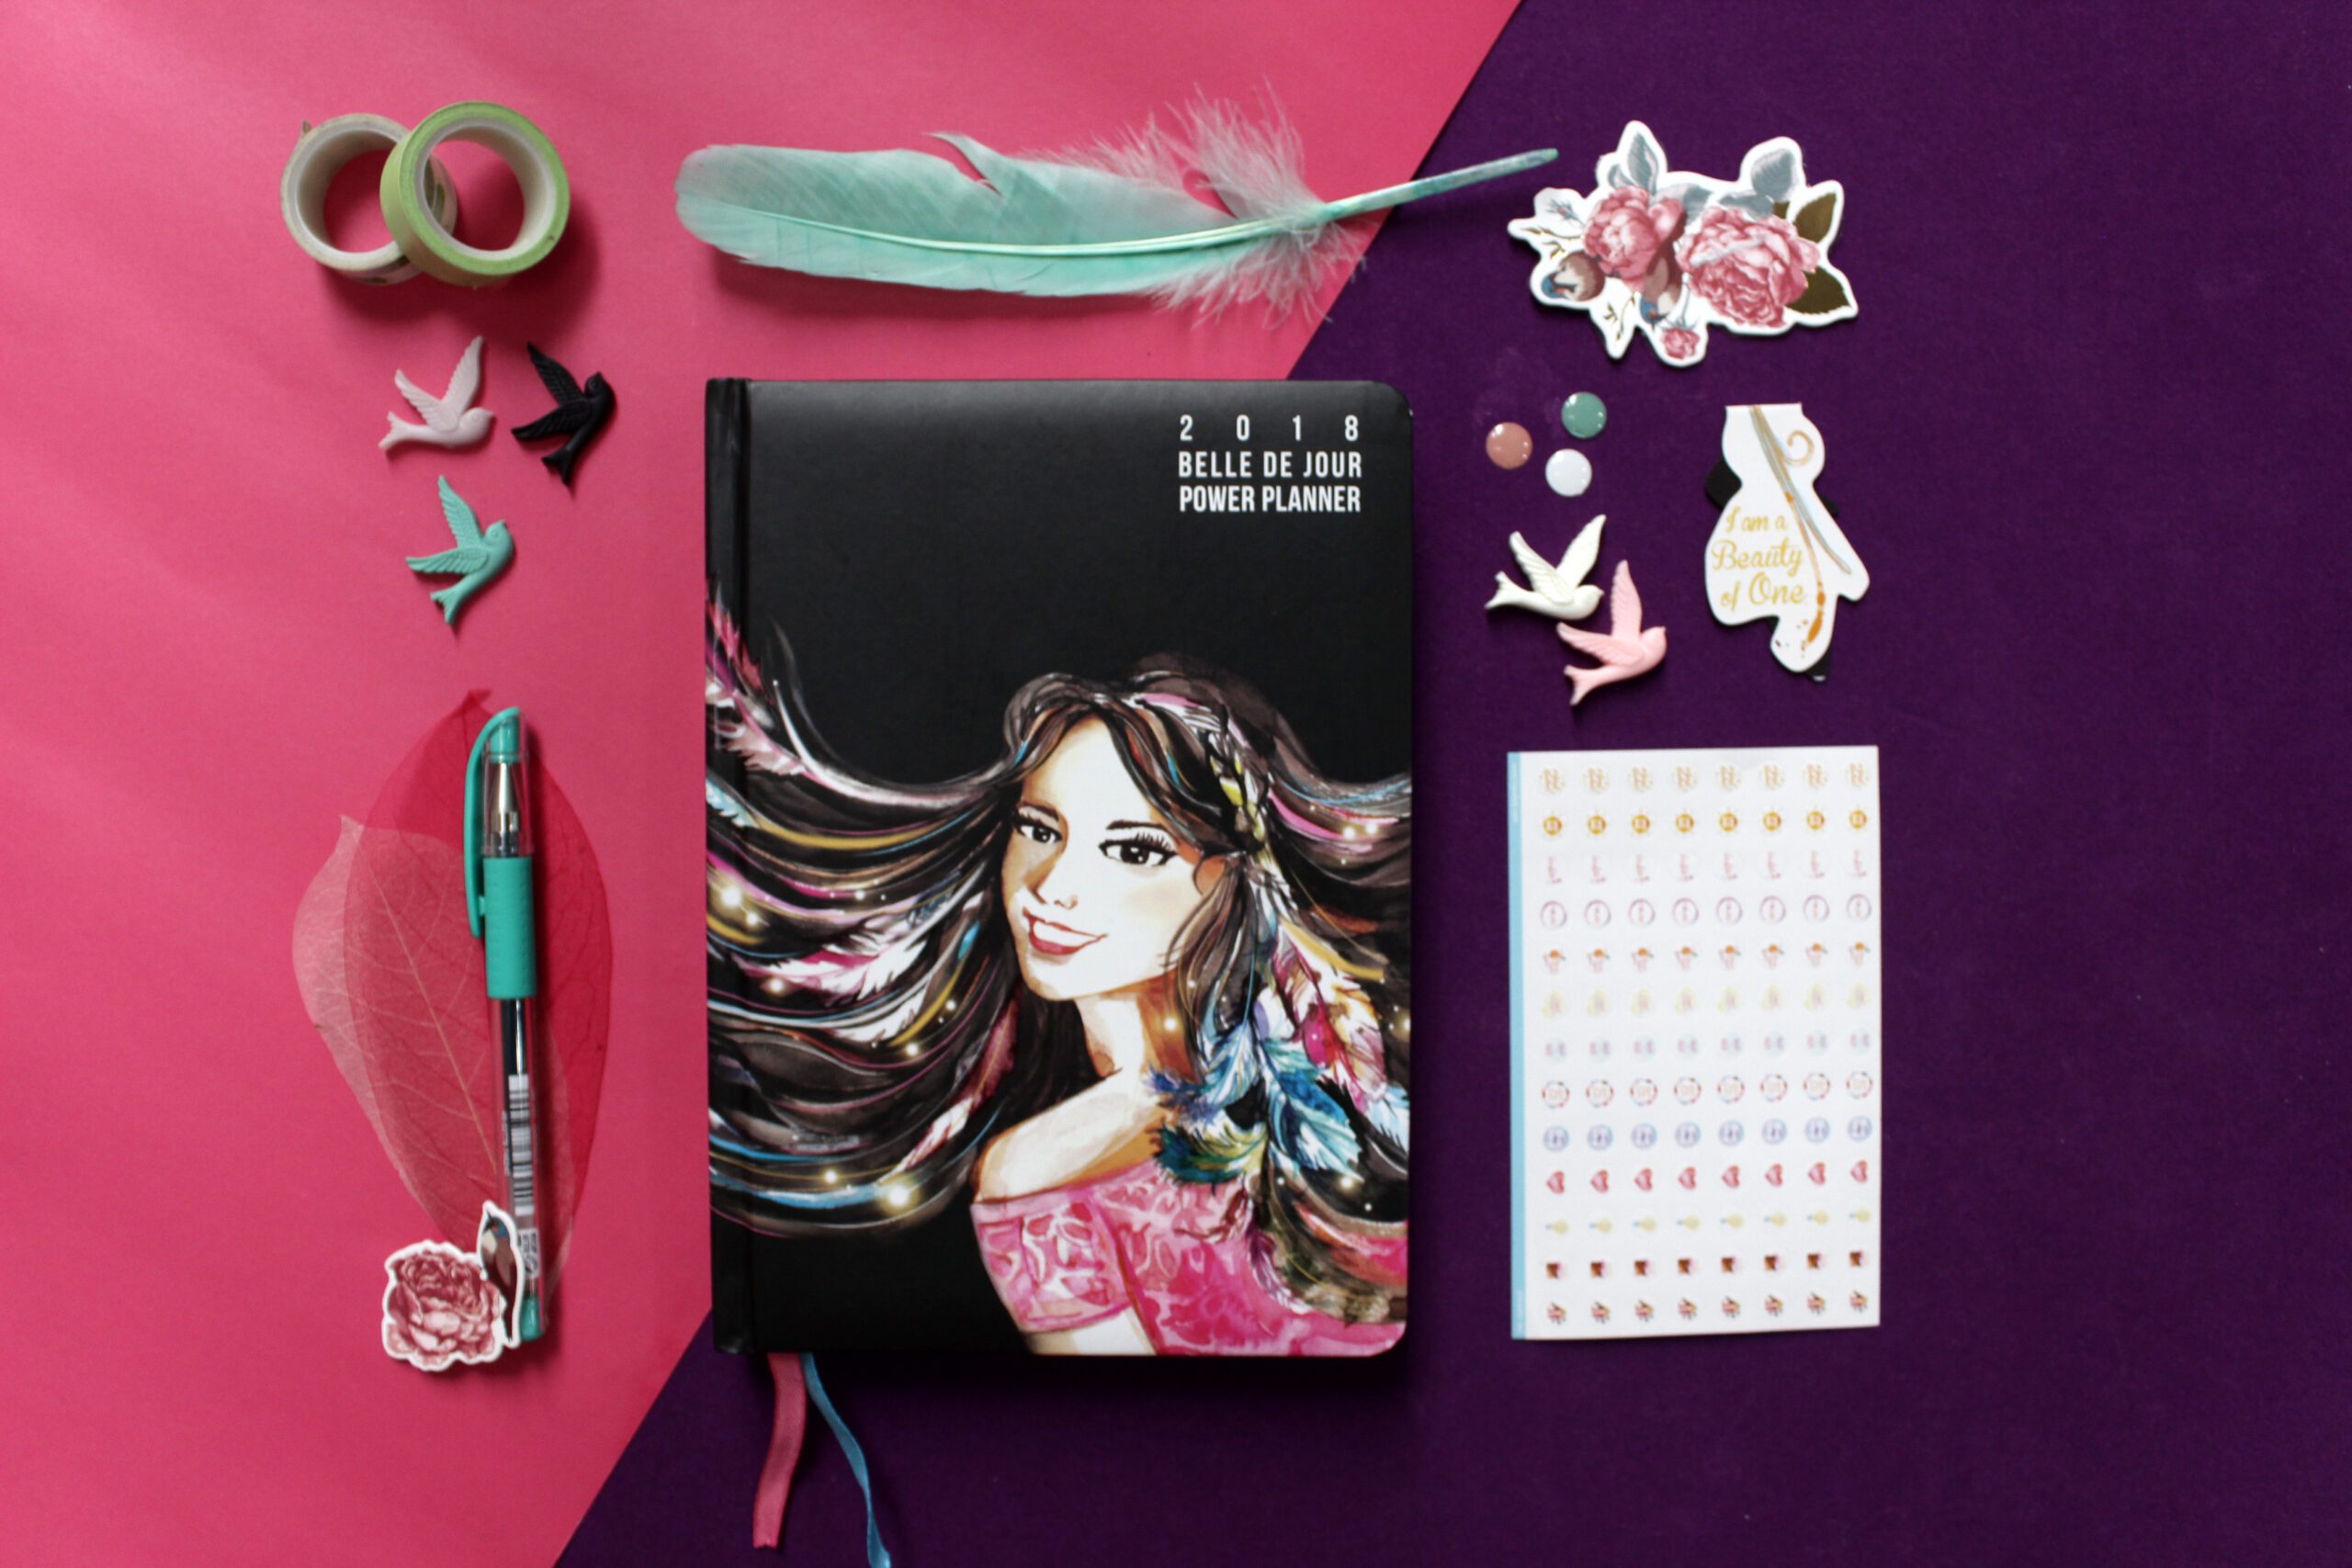 Belle de Jour celebrates individuality with the 2018 Power Planner